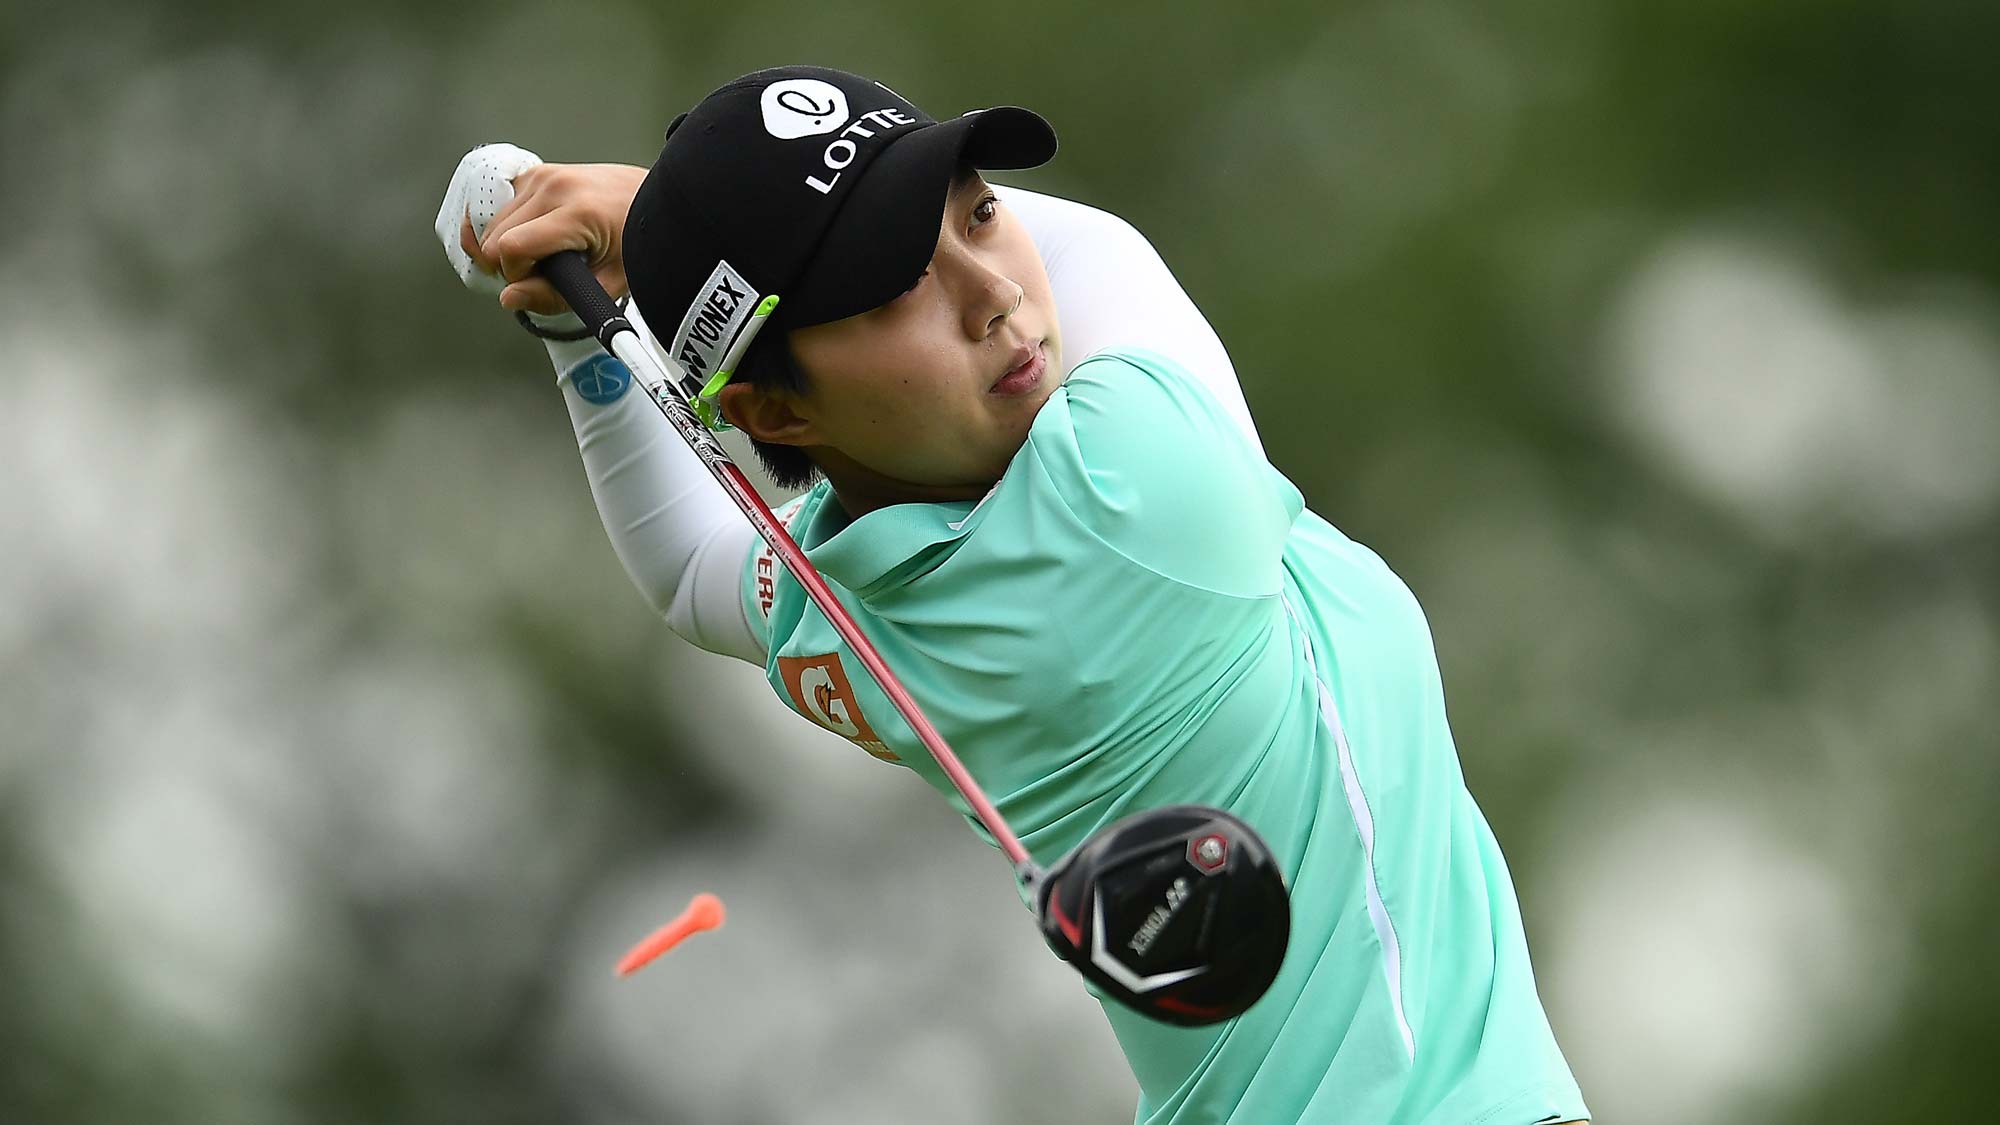 Hyo Joo Kim of Korea hits her tee shot on the third hole during the first round of the KPMG PGA Championship